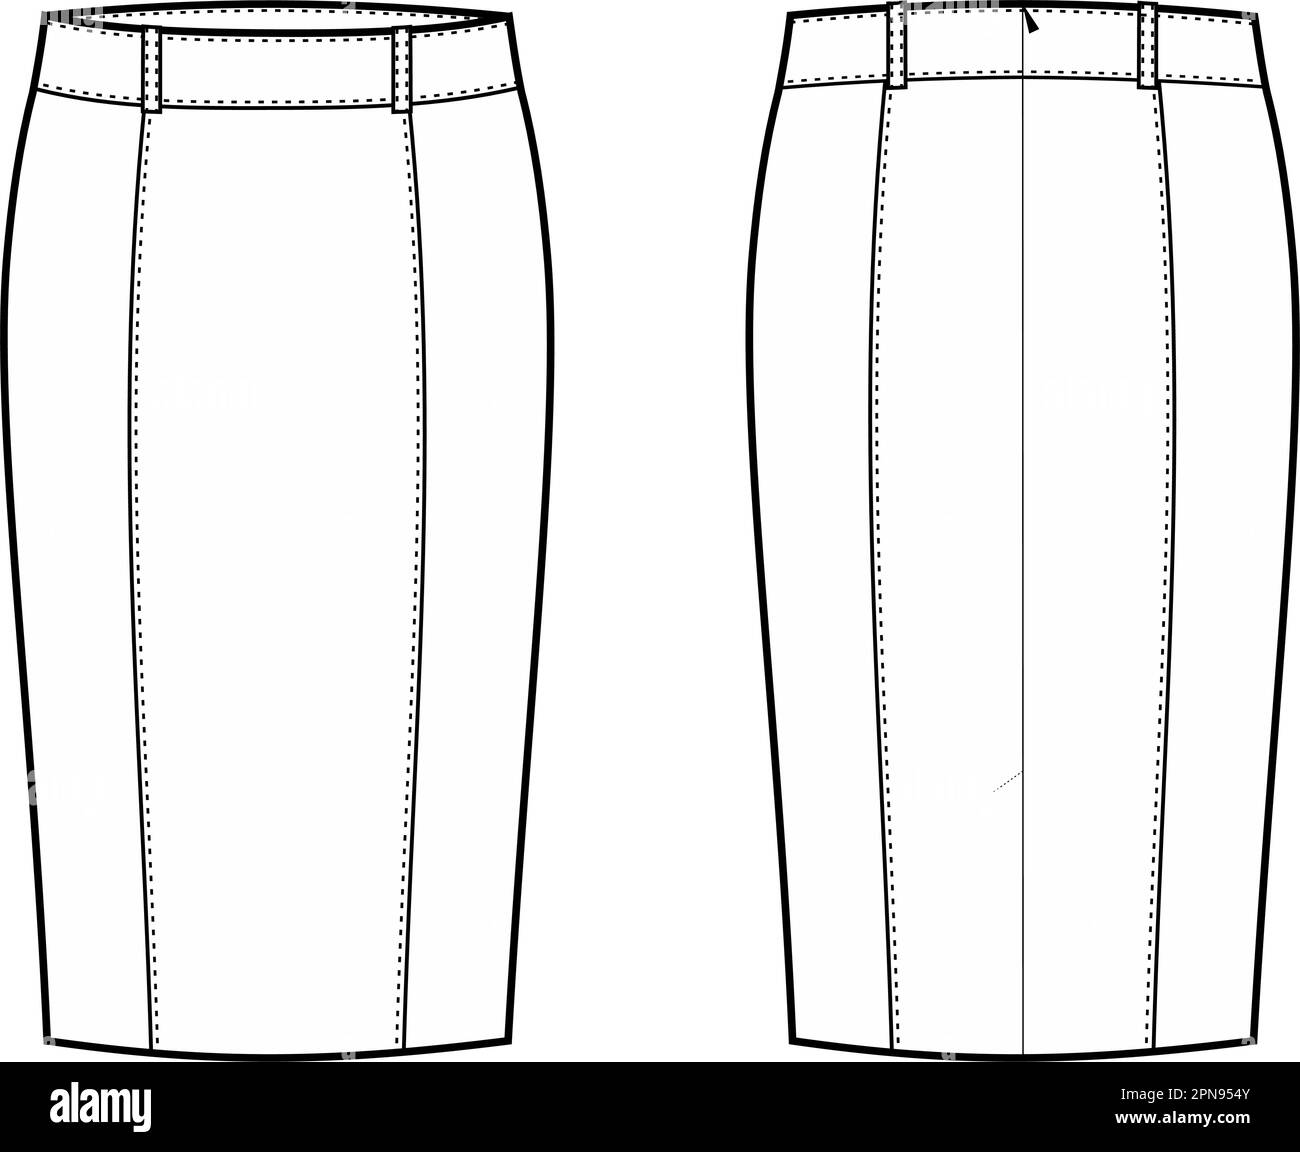 Pencil skirt technical drawing Stock Vector Images - Alamy